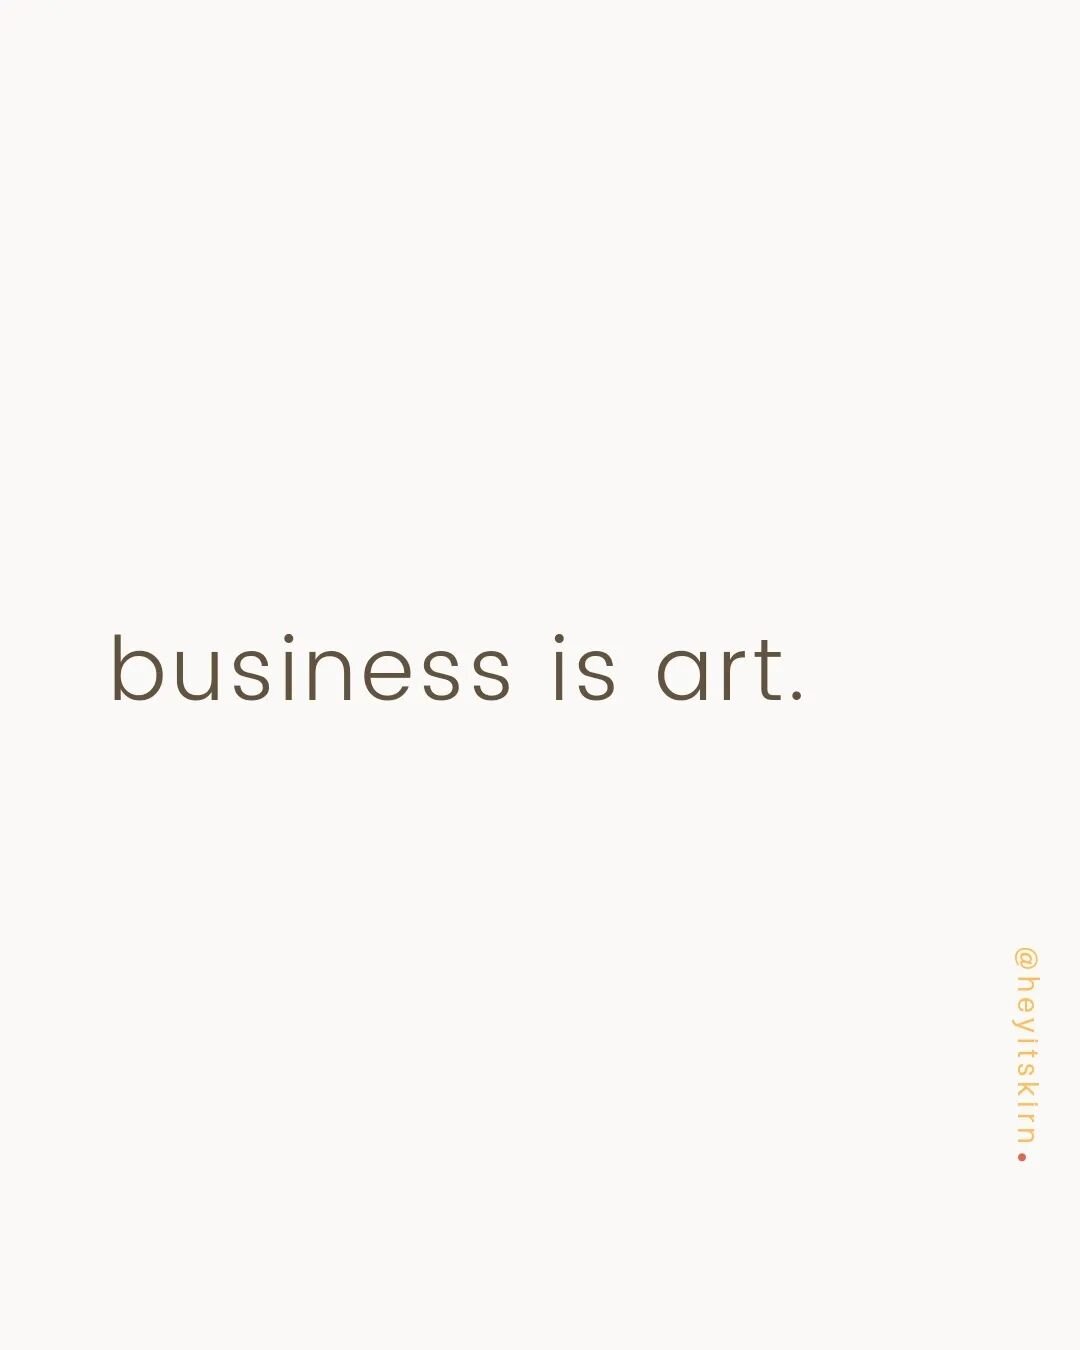 join me, let's make art 🌻

soulful business is my 1:1 private coaching program &mdash;

a journey in getting unstuck, uncovering your truth, and taking value-aligned action in your life + business.

if you feel called, DM me, let's chat 🧡

&mdash;